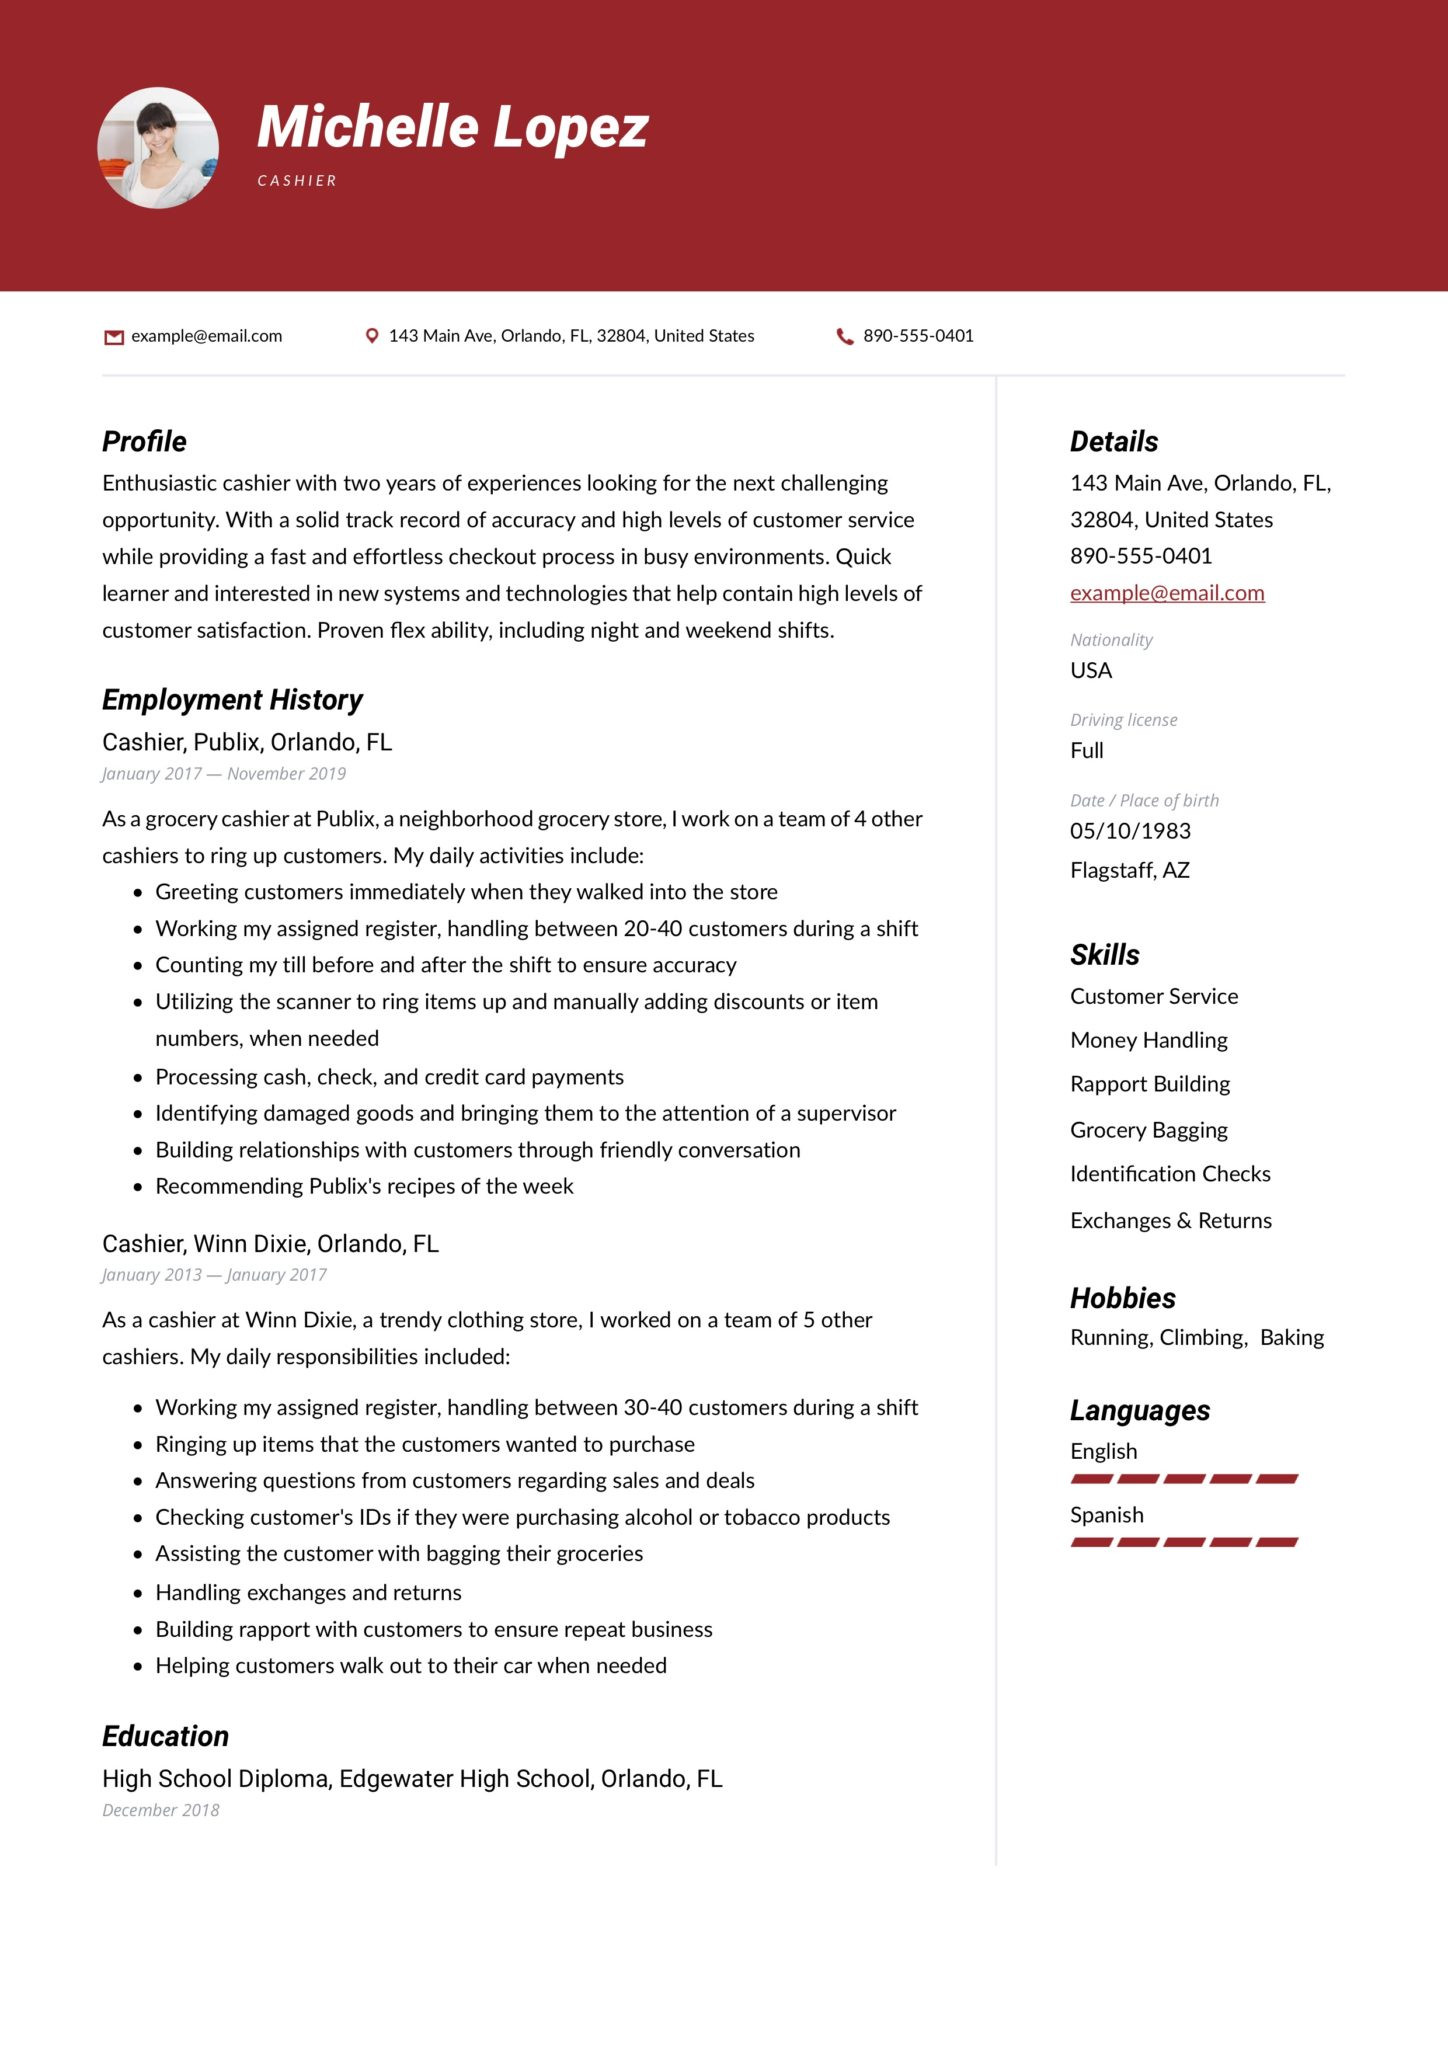 Free Sample Resume for Cashier Position Cashier Resume & Writing Guide [ 12 Samples ] Pdf & Word